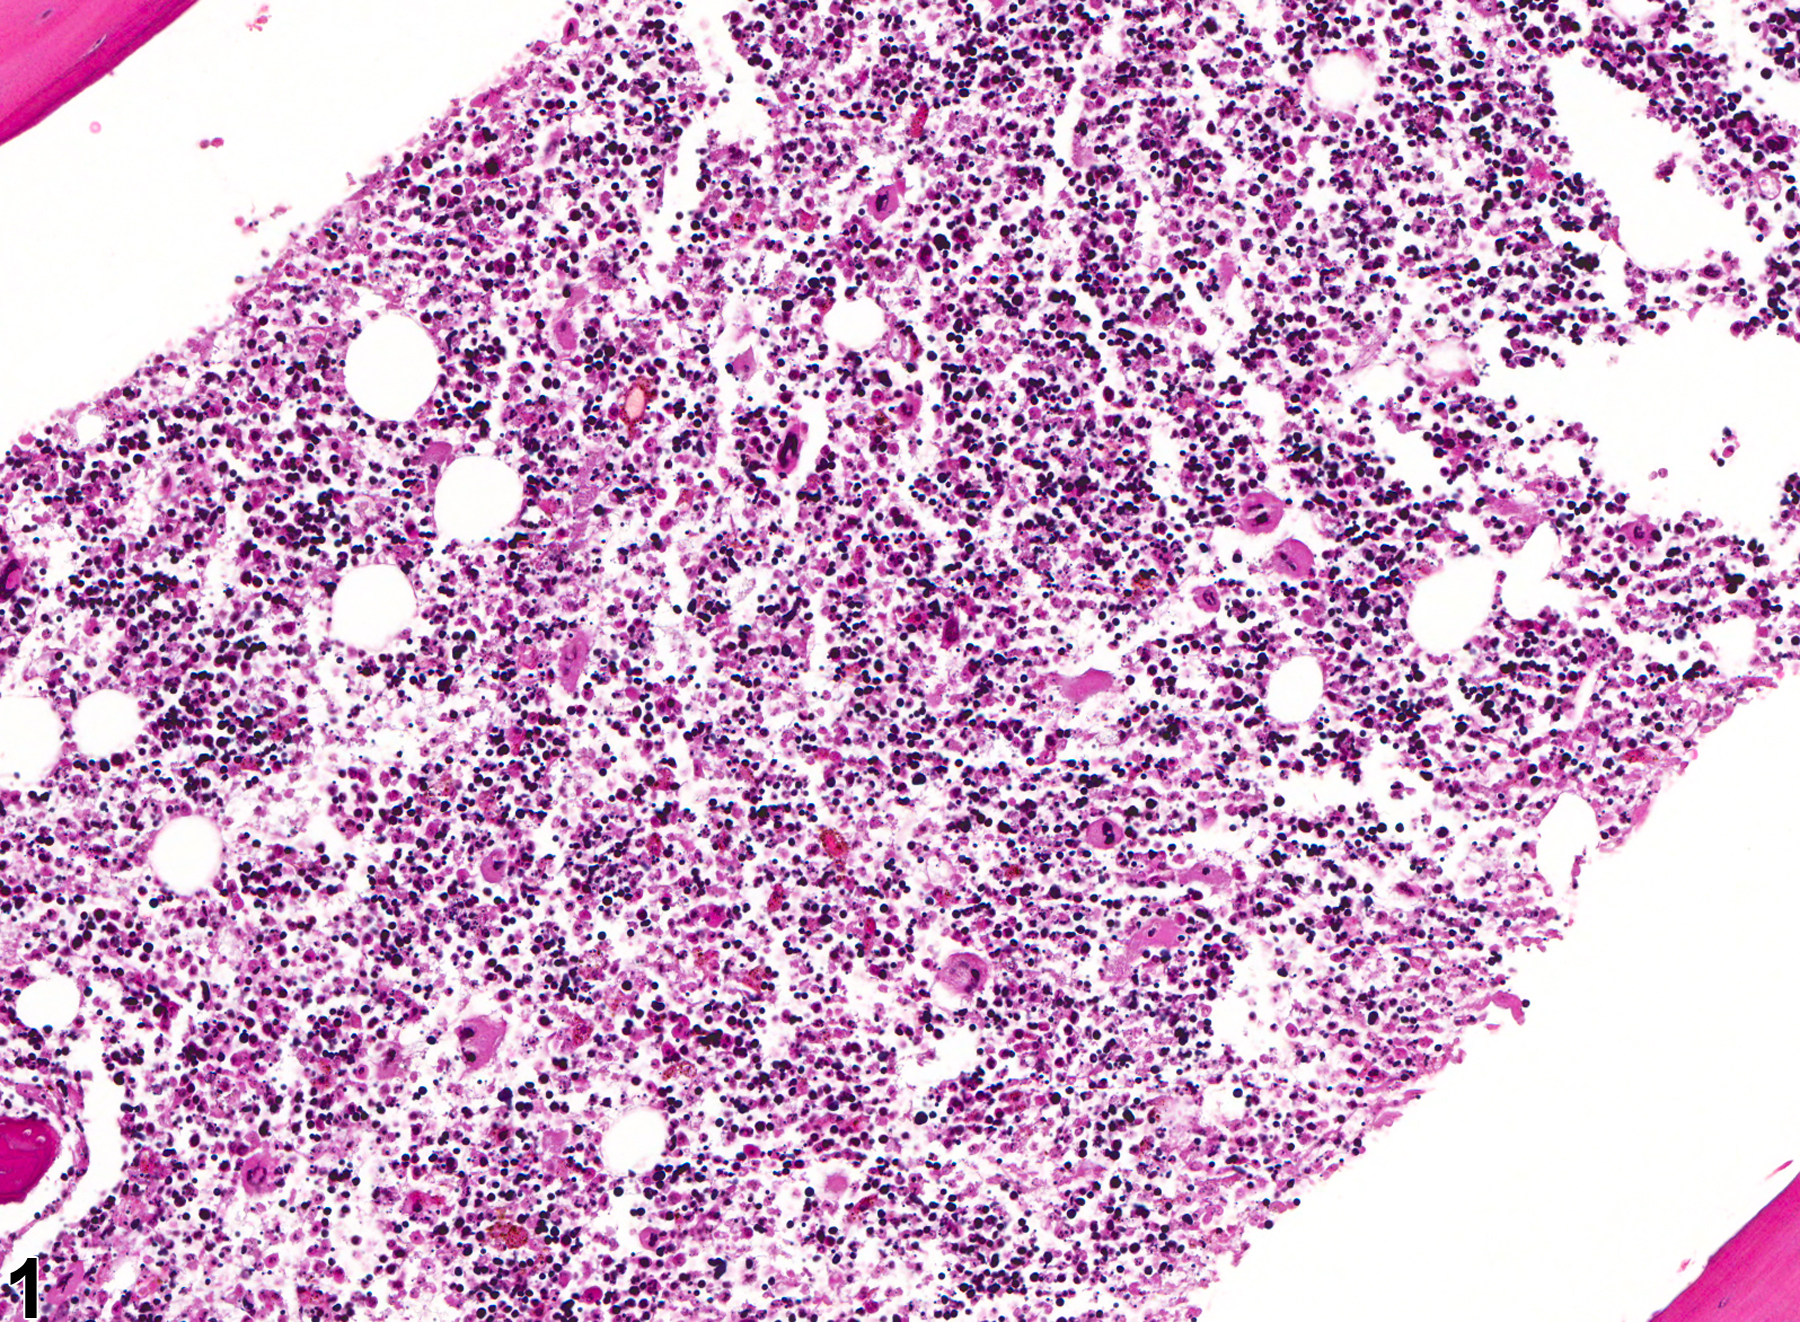 Image of necrosis in the bone marrow from a female B6C3F1 mouse in a chronic study